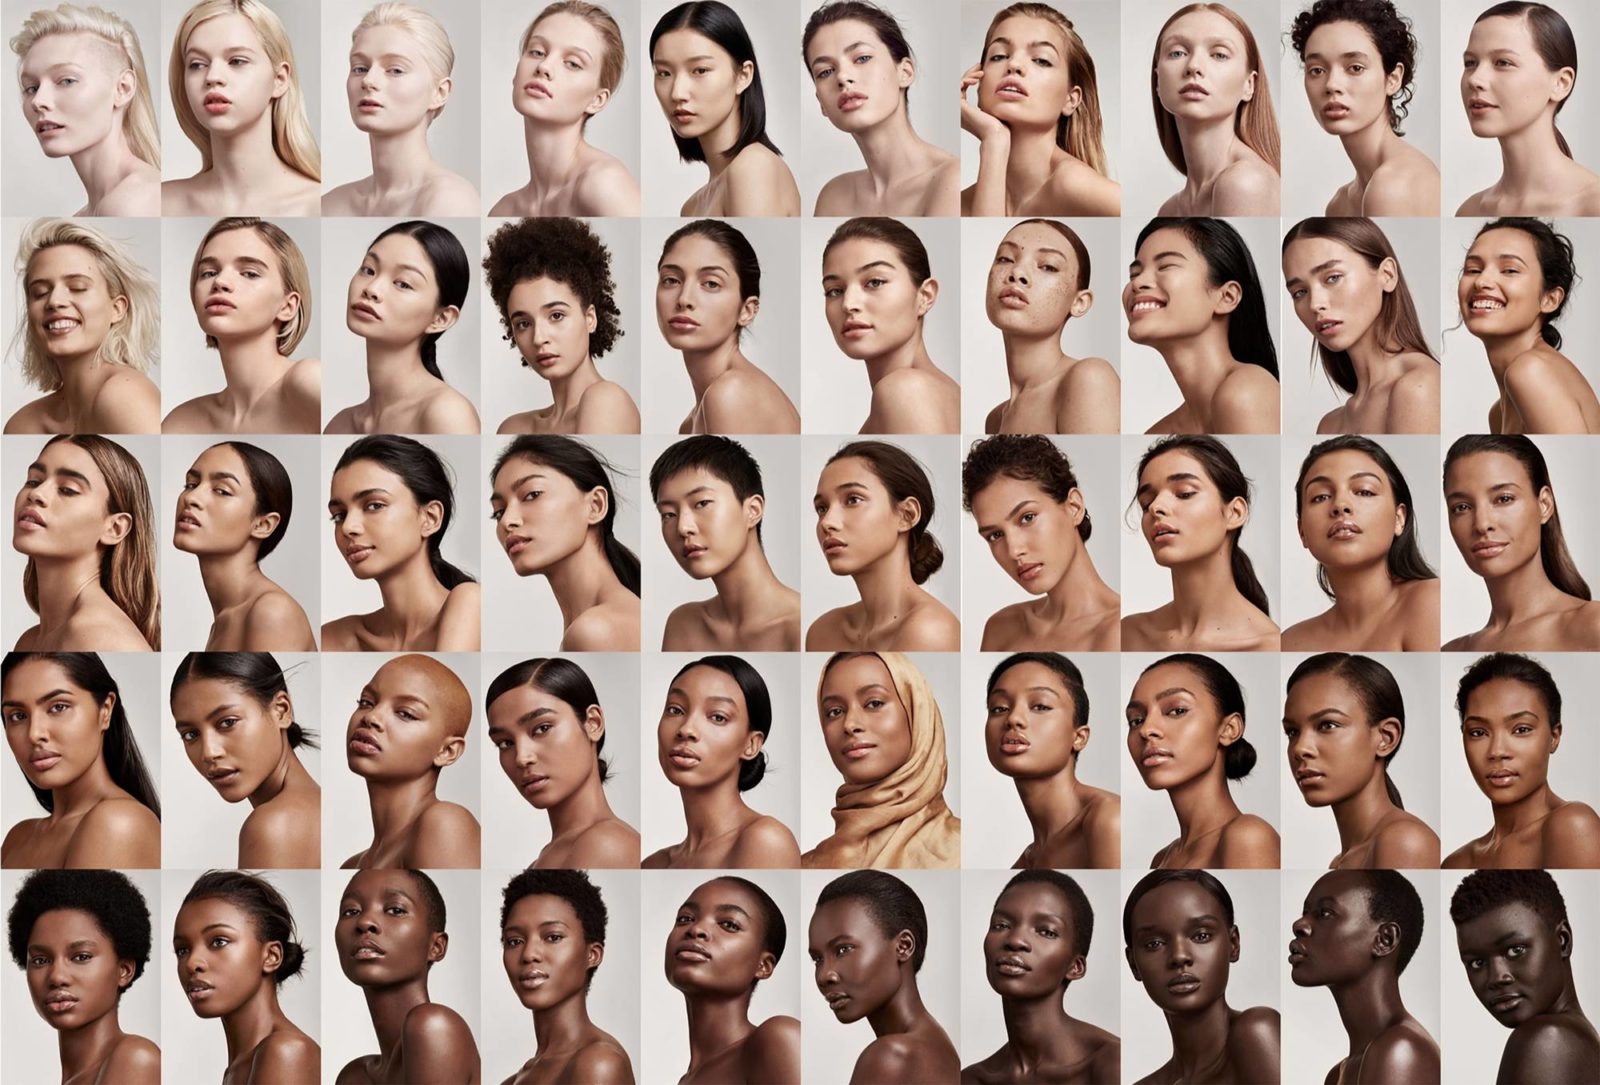 Fenty Built a Wildly Inclusive Beauty Brand Without Ever Explicitly Marketing Itself as ...